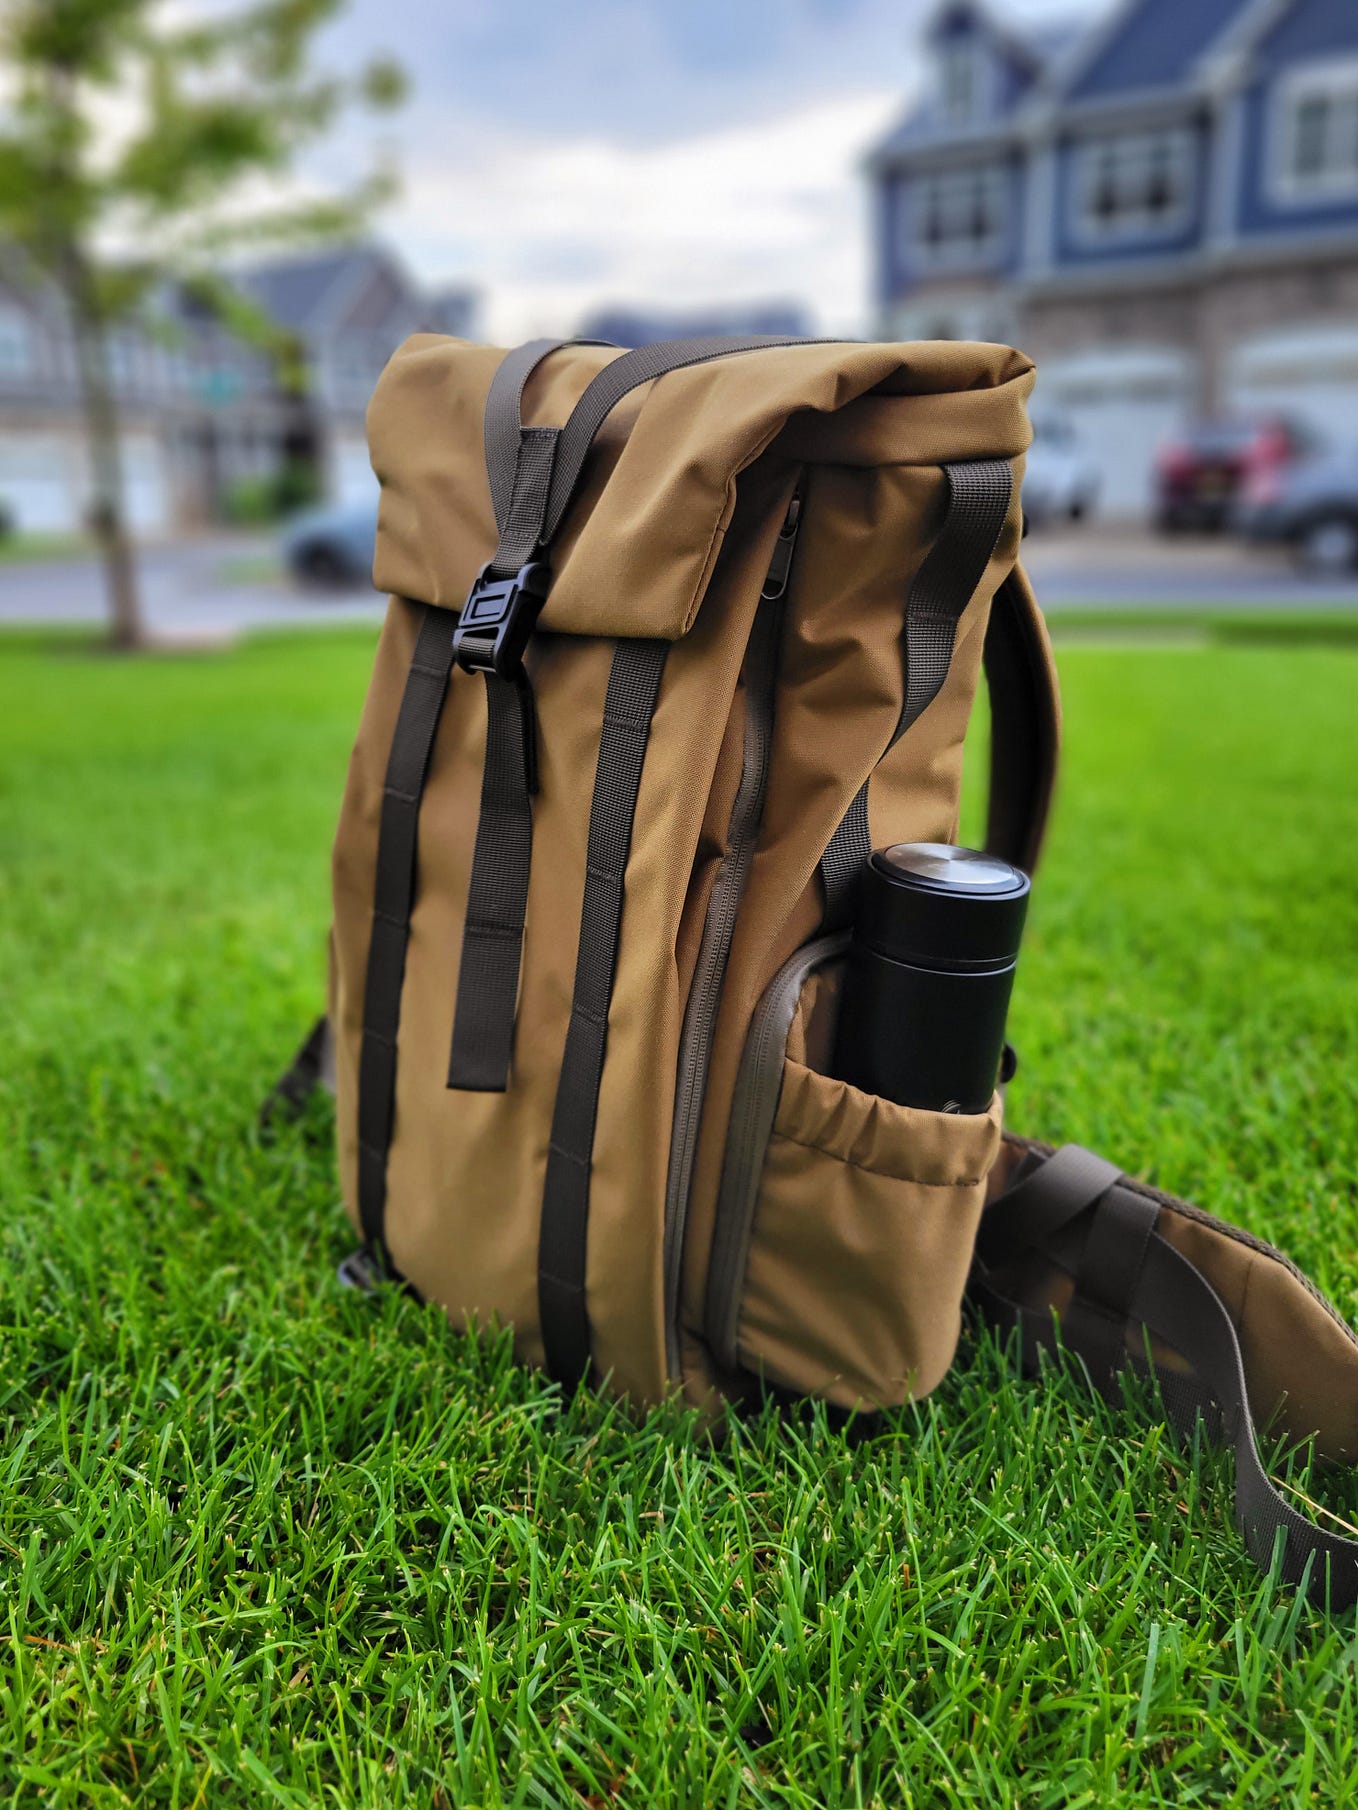 Six Rules for Protecting Your Gym Bag from Bacteria – Eagle Creek